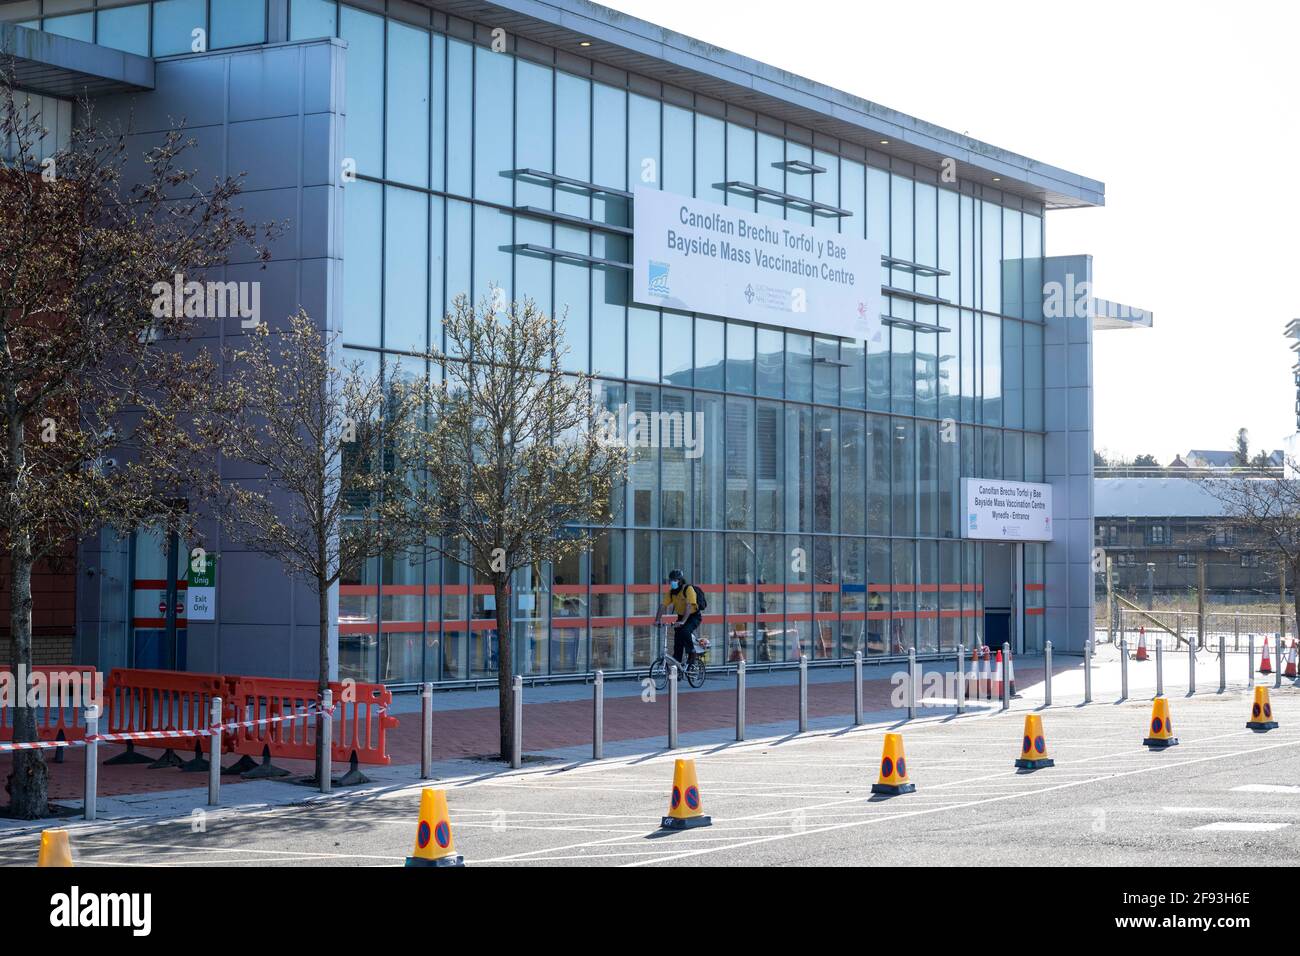 CARDIFF, WALES - MARCH 25: A general view of Bayside mass vaccination centre in Cardiff Bay on March 25, 2021 in Cardiff, Wales. The infection rate ac Stock Photo